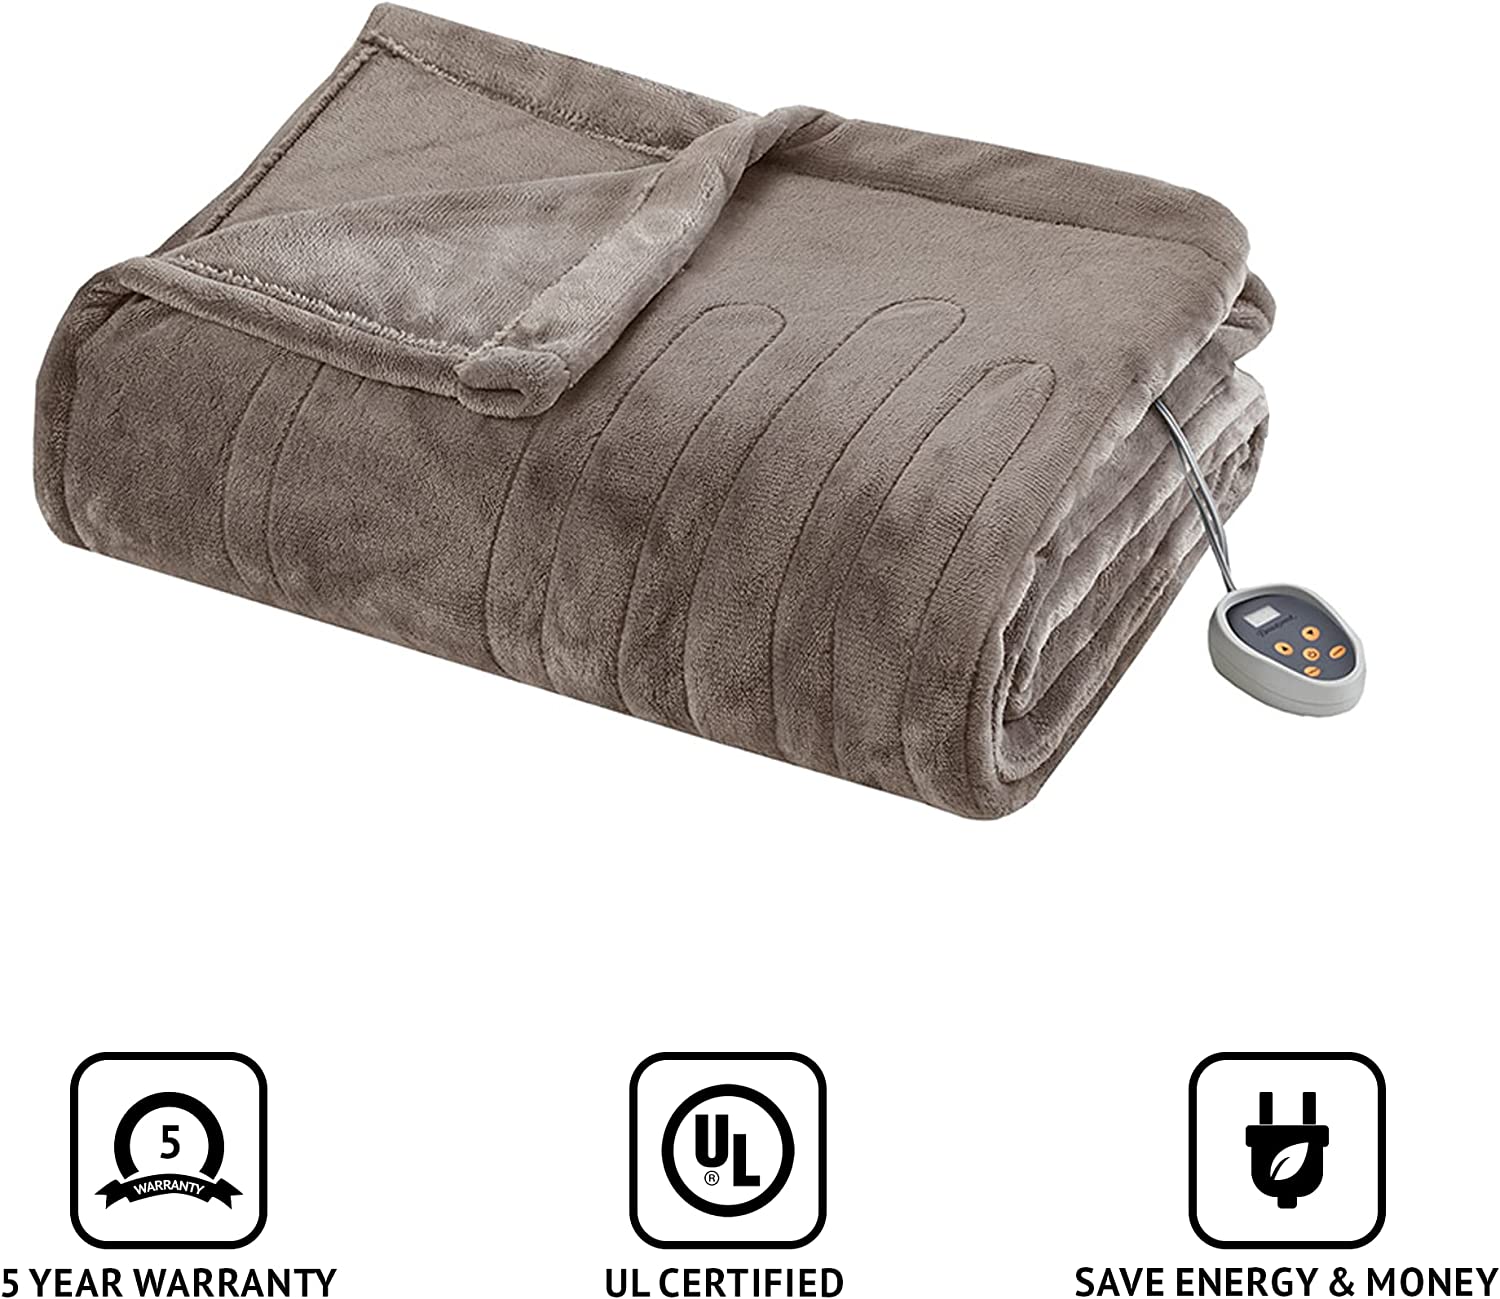 Beautyrest Plush Electric Blanket for Cold Weather, Fast Heating, Auto Shut Off, Virtually Zero EMF, Multi Heat Setting, UL Certified, Machine Washable, Mink Full (84 inx80 in)